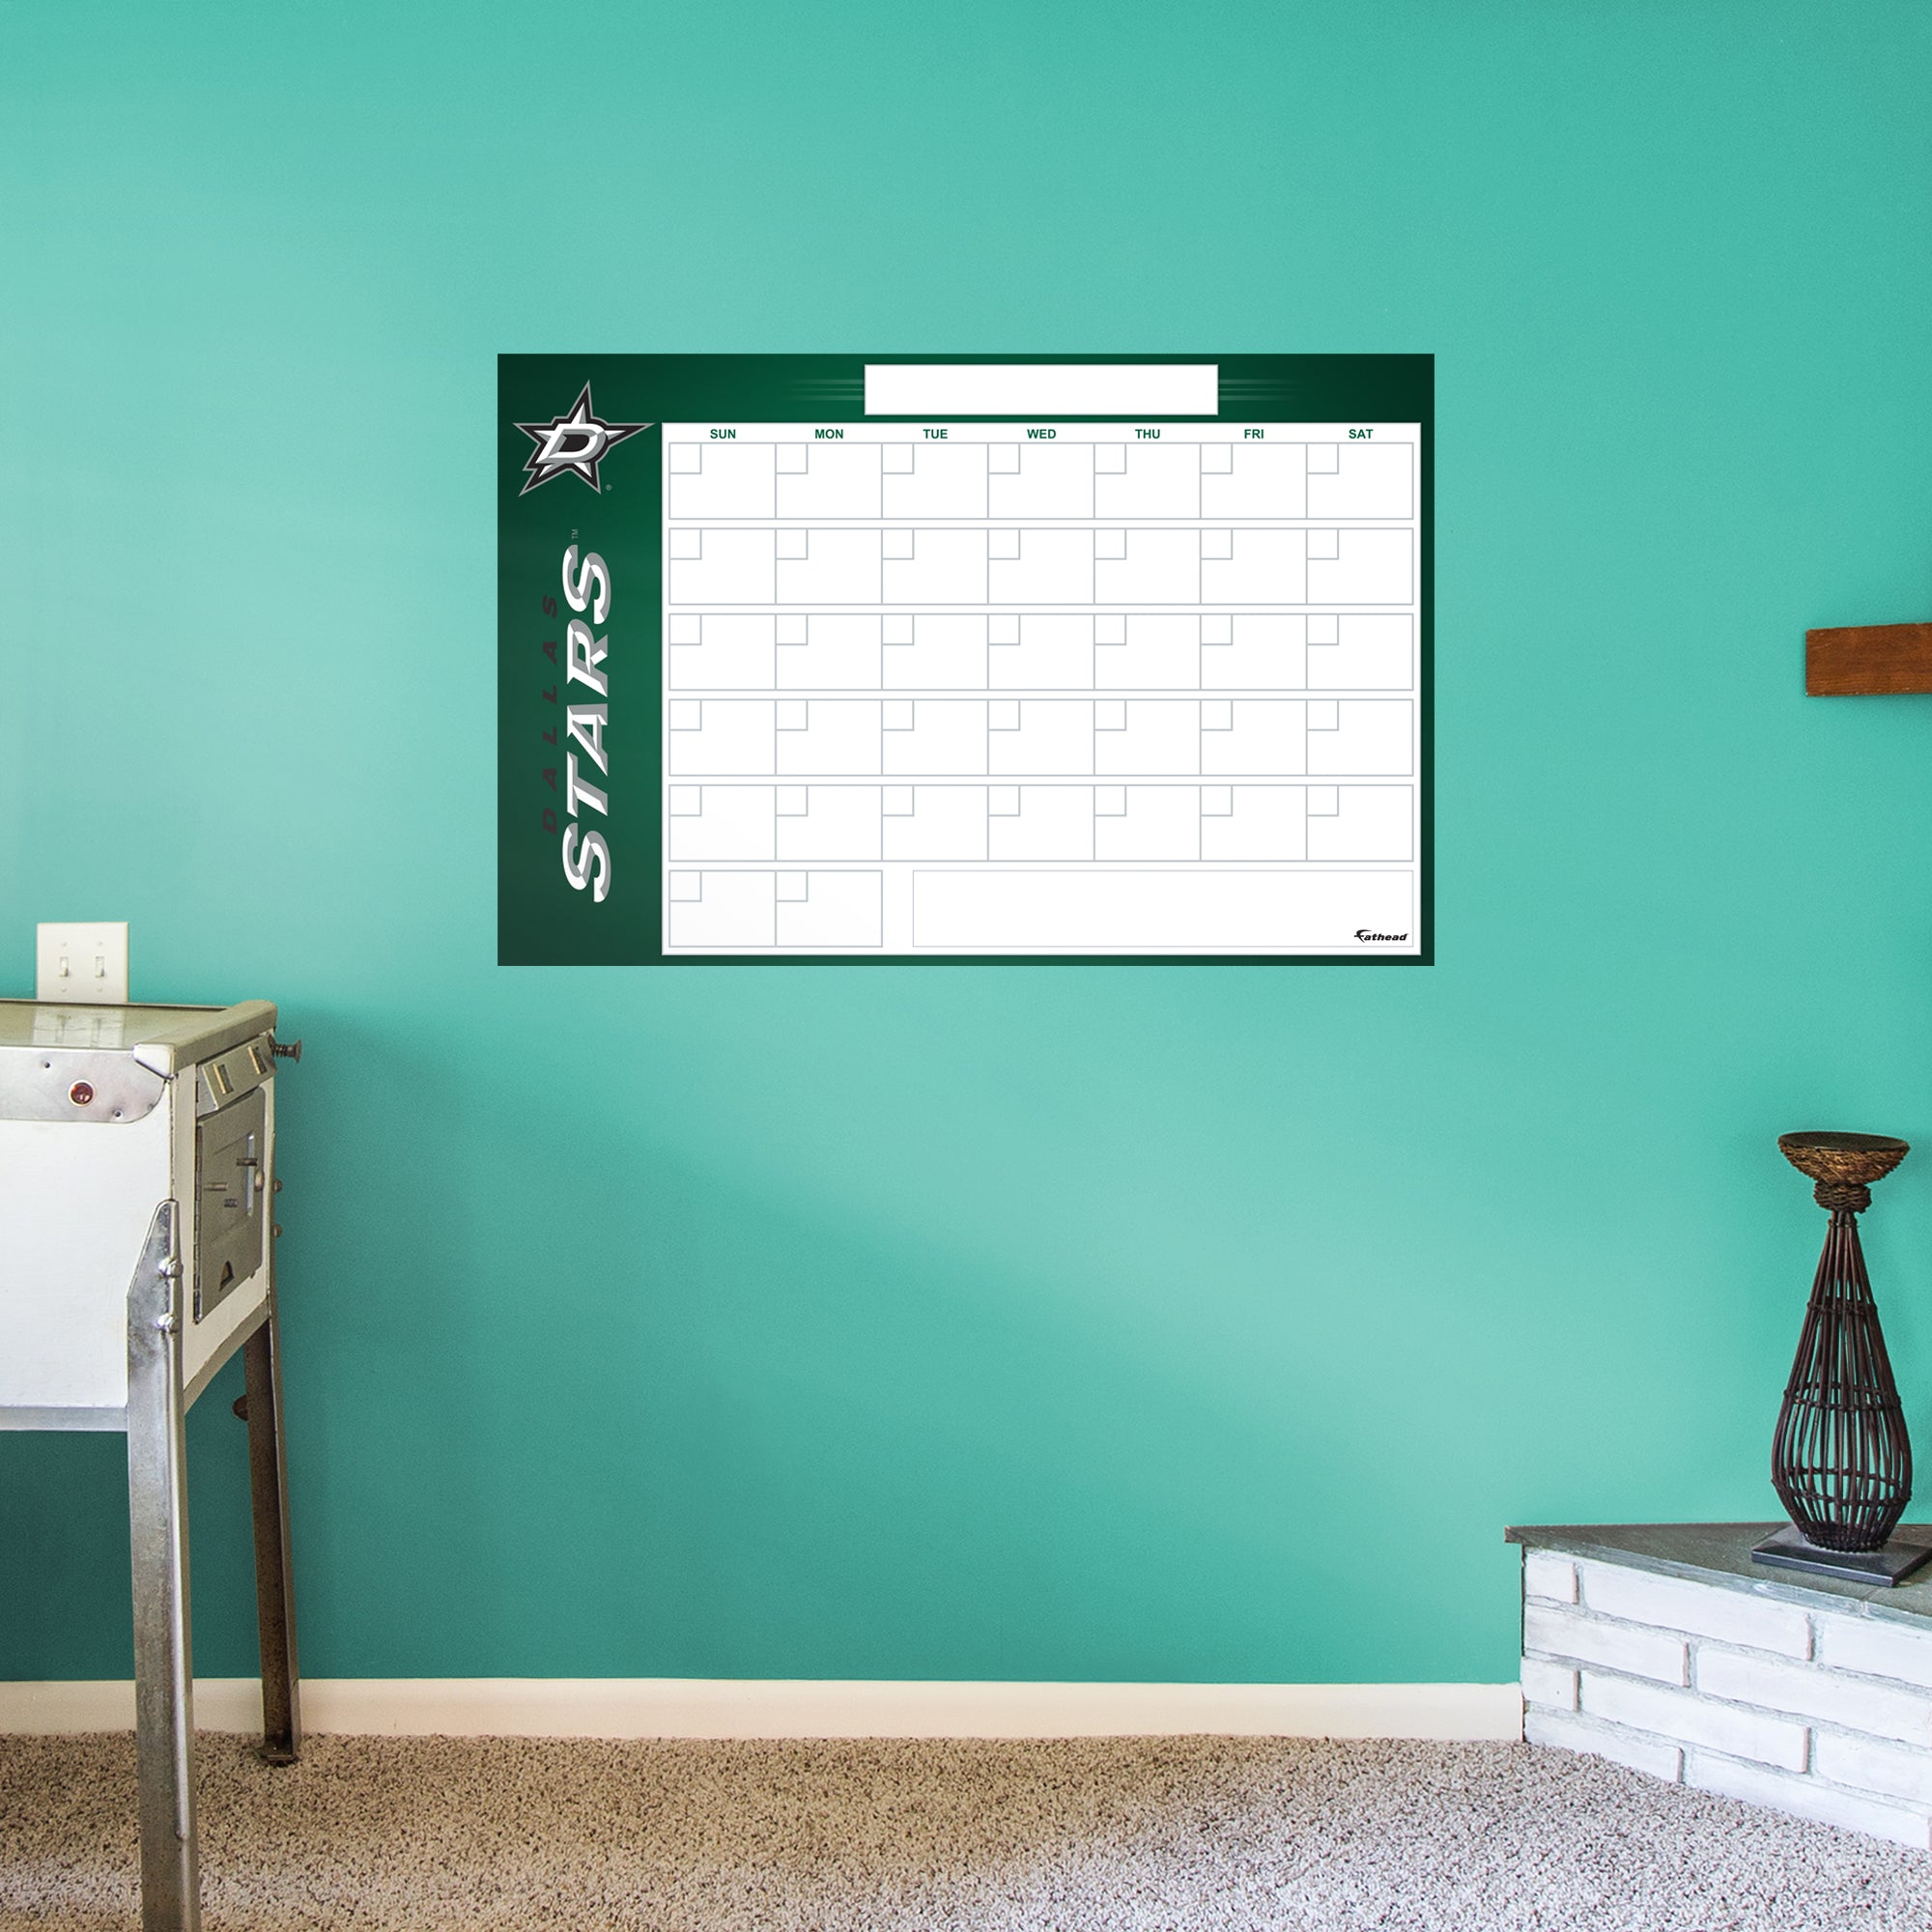 Dallas Stars Dry Erase Calendar - Officially Licensed NHL Removable Wall Decal Giant Decal (57"W x 34"H) by Fathead | Vinyl